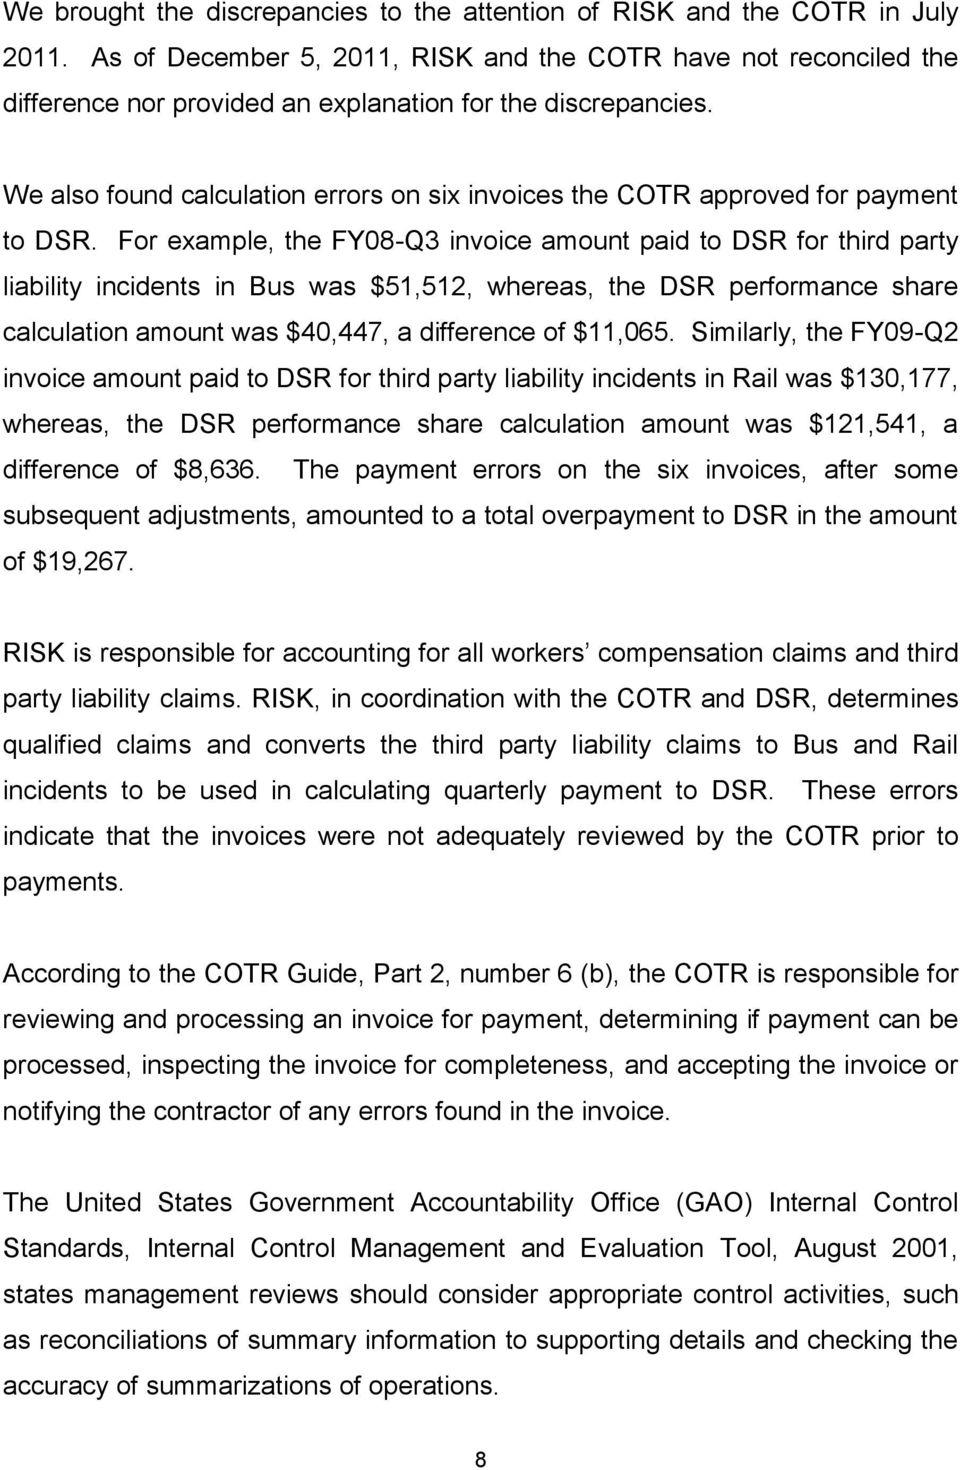 We also found calculation errors on six invoices the COTR approved for payment to DSR.